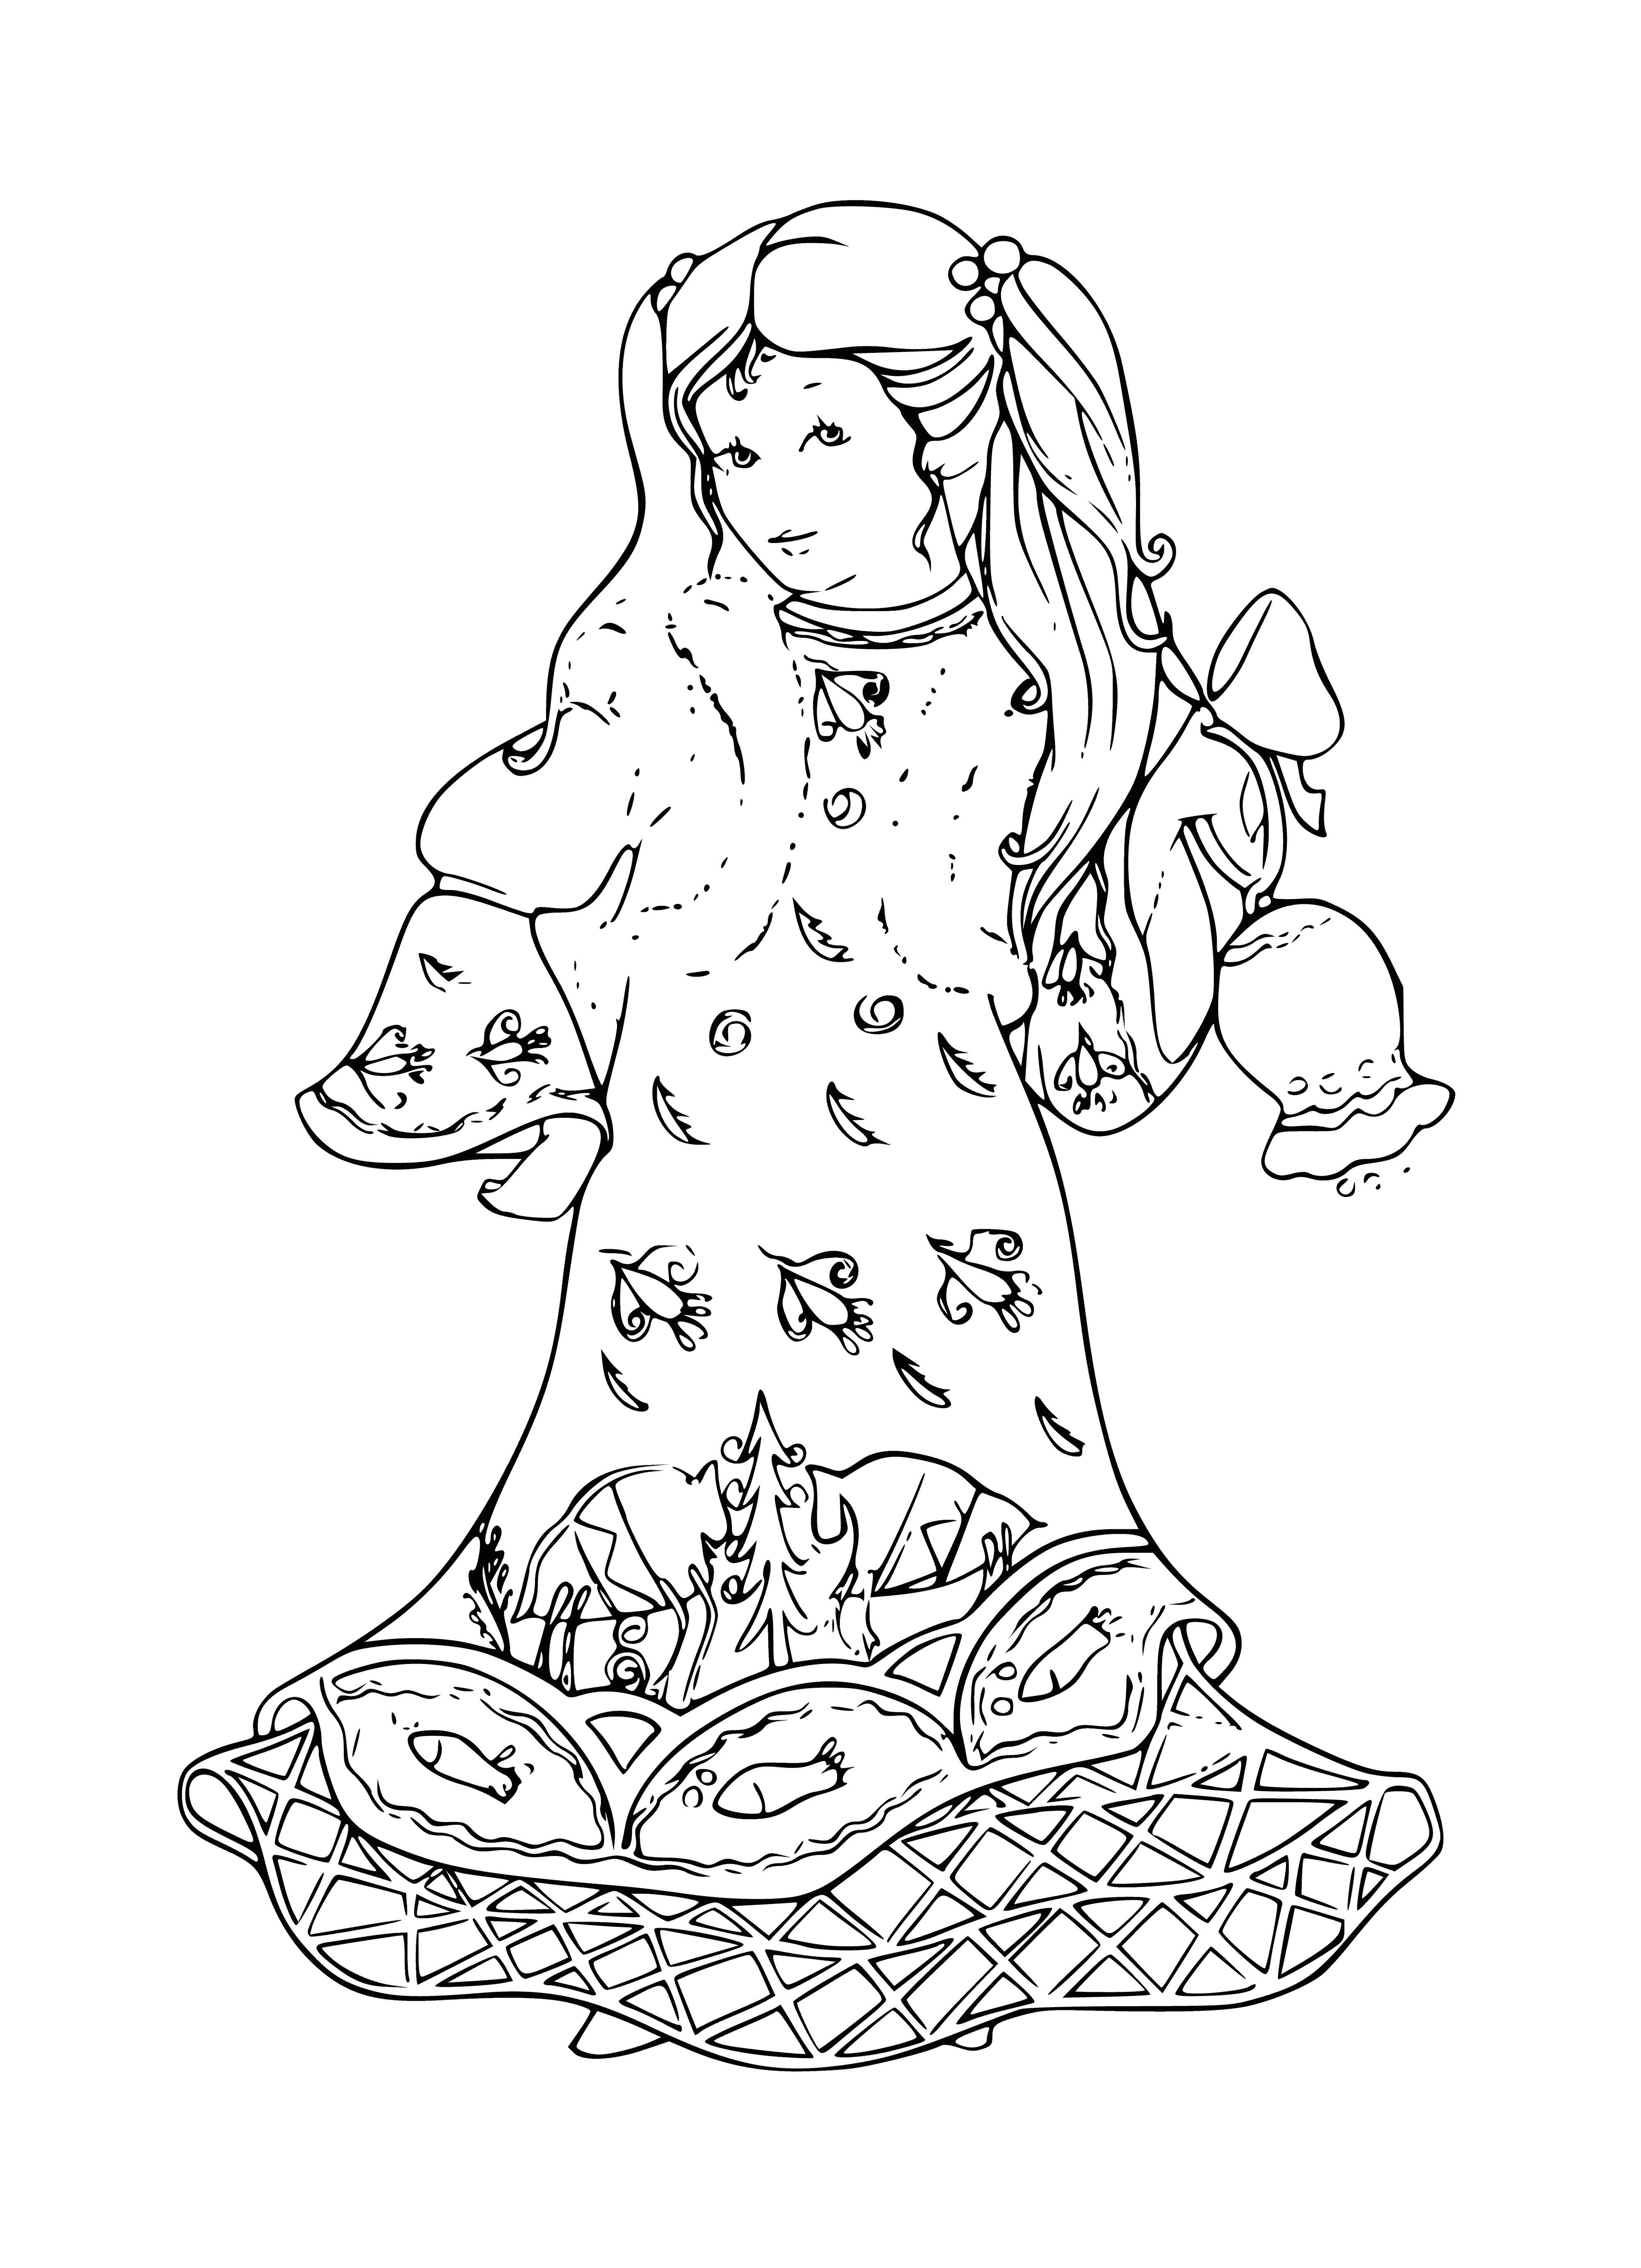 coloring page: Woman in elegant dress stands in garden with flower in her hand.  #art #painting